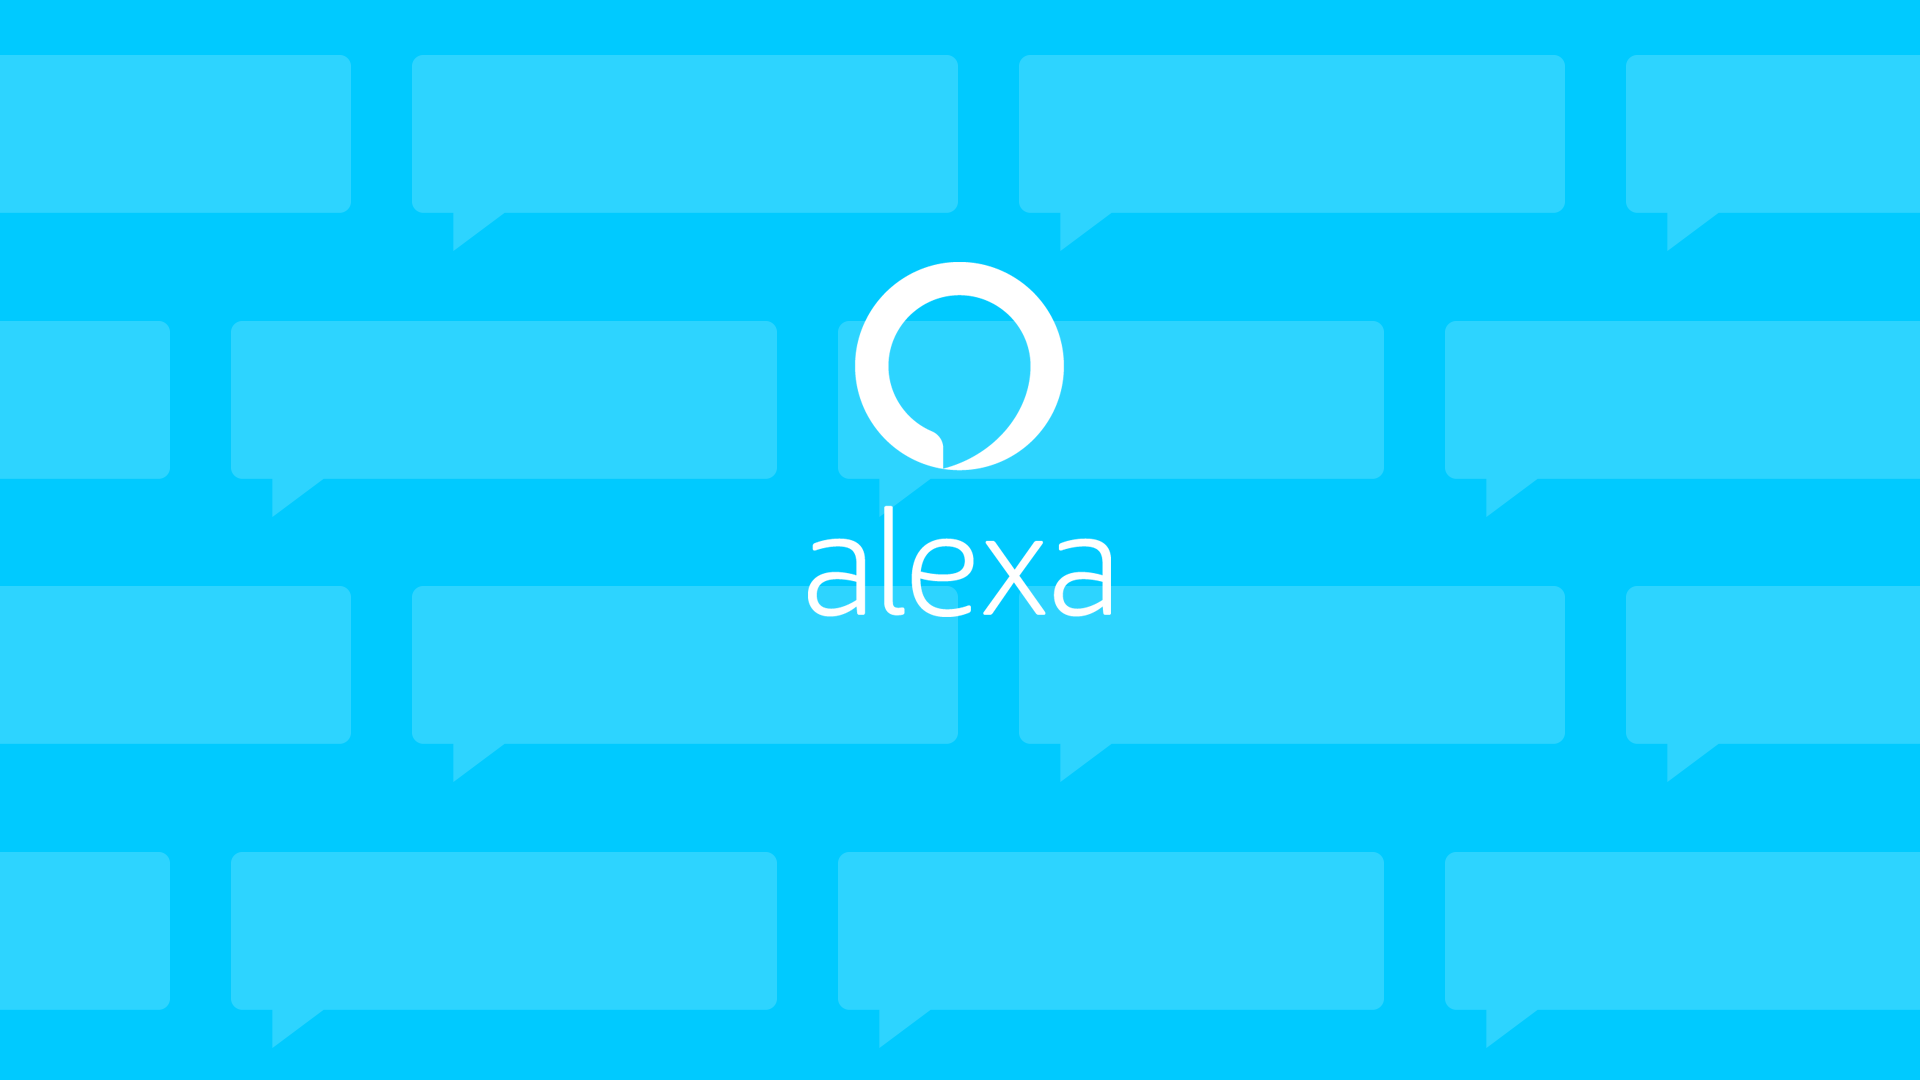 Download alexa app for windows 10 pc free download battlefield 2 for pc